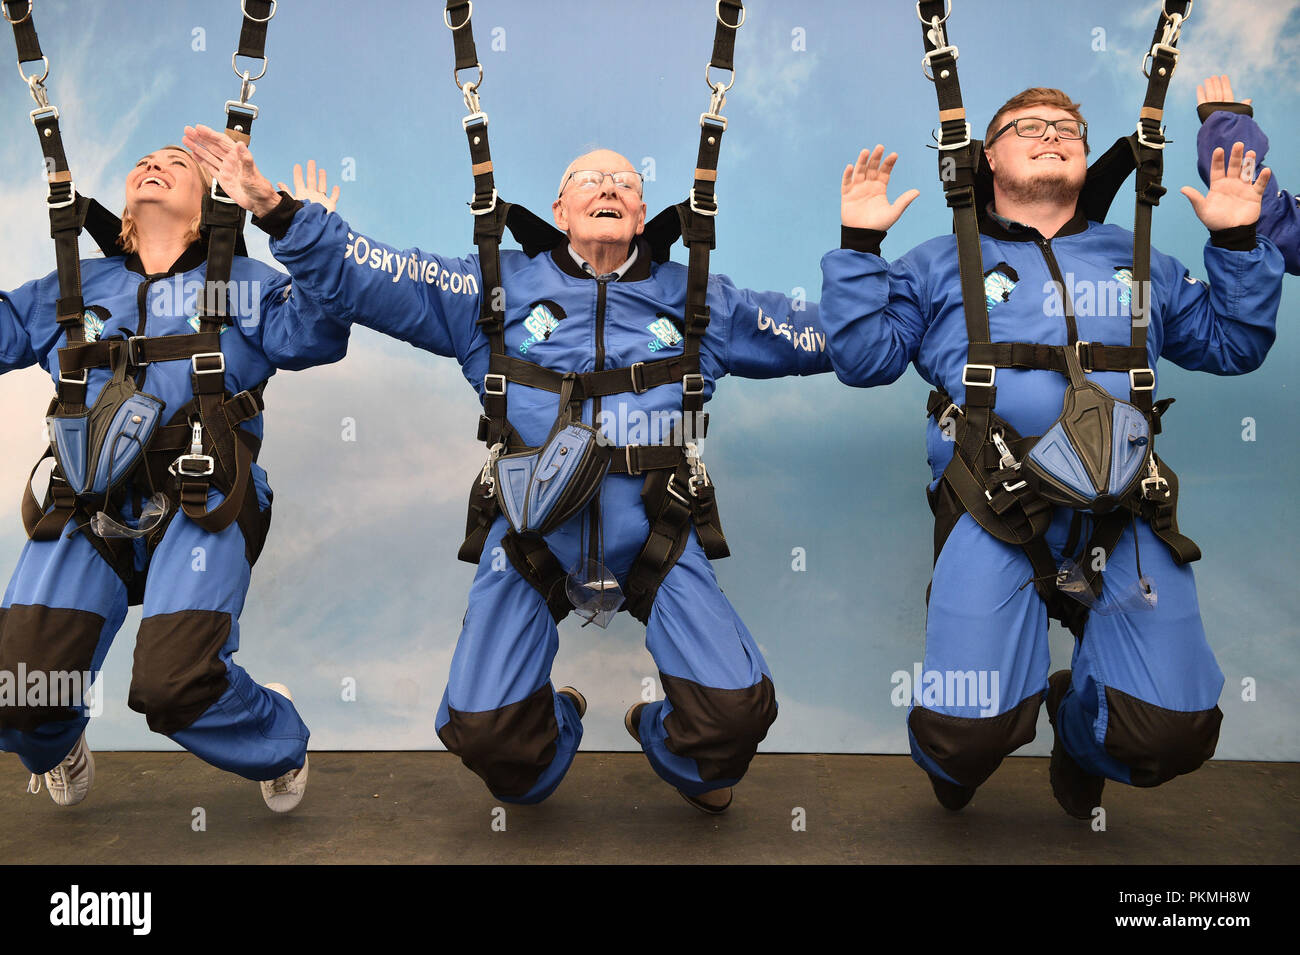 D-Day veteran Harry Read, 94, with his granddaughter Jo Taylor, 38, and great grandson Josh Shaw, 23, practising a skydive position at Old Sarum Airfield, Salisbury, Wiltshire, where he is taking part in his first high level skydive since he parachuted into Normandy on 6 June 1944. Stock Photo